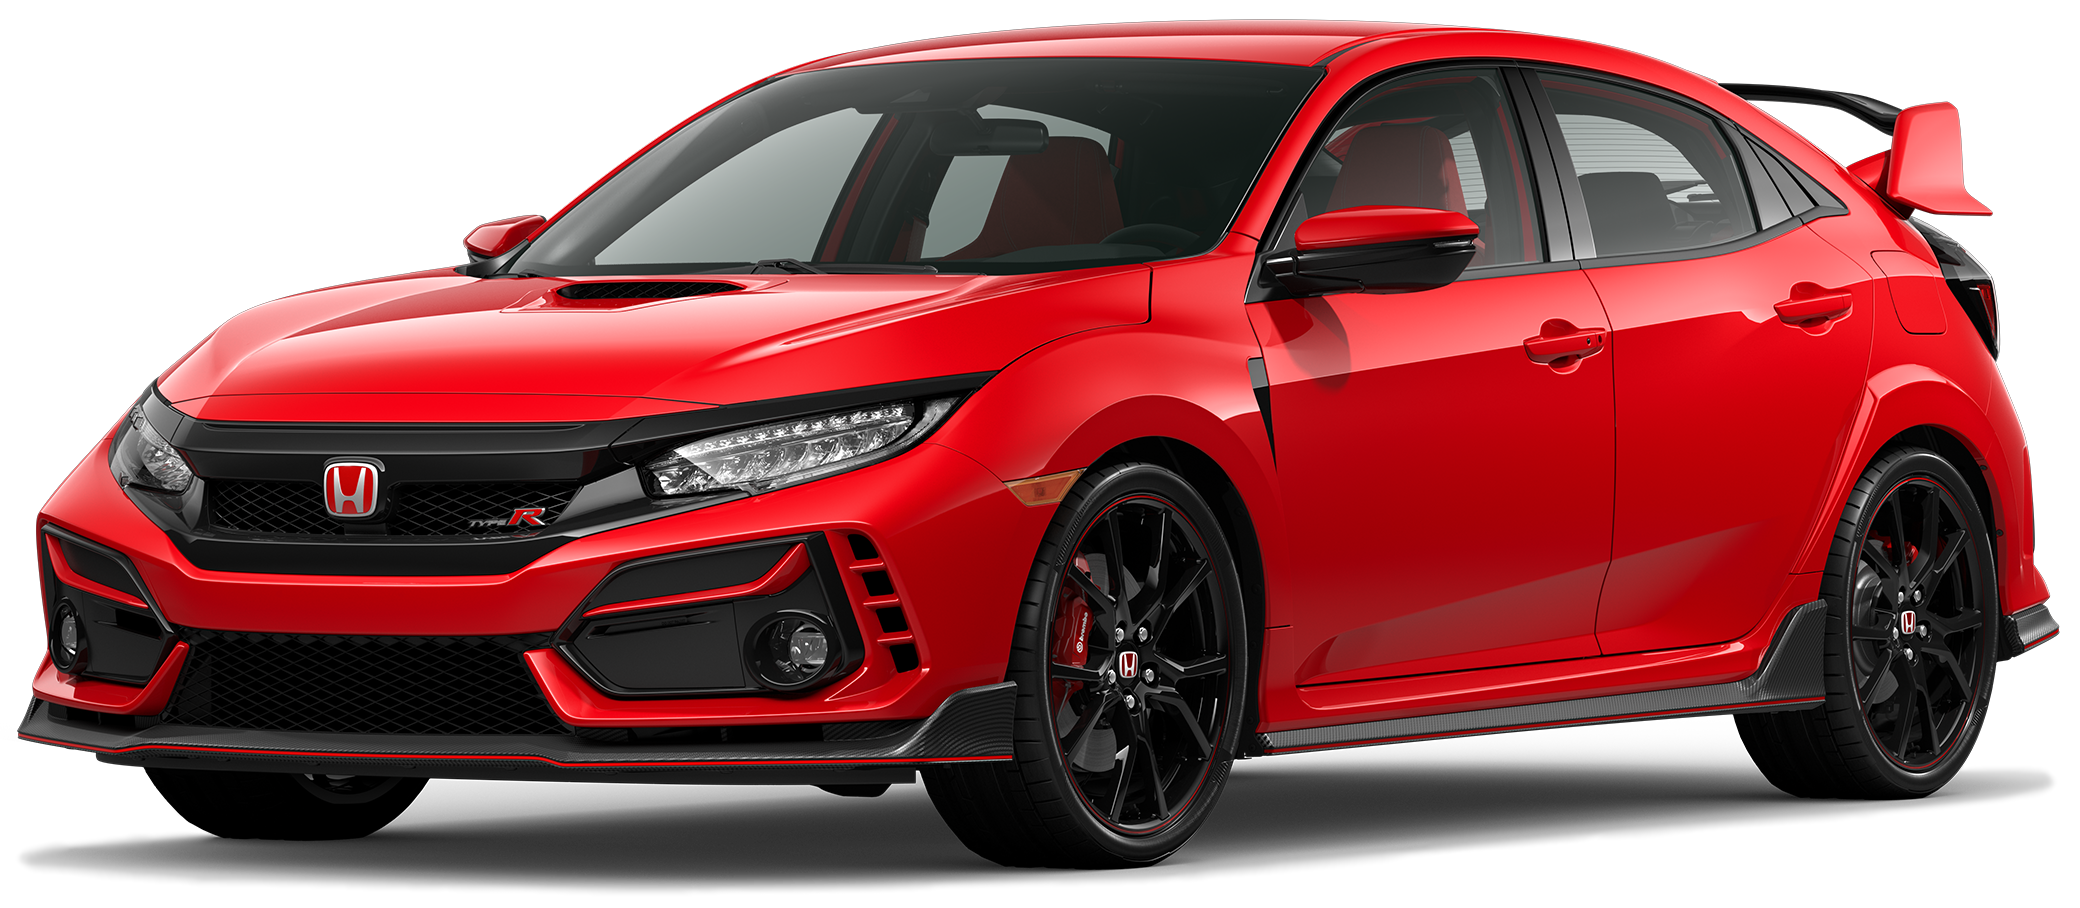 2021 Honda Civic Type R Incentives, Specials & Offers in ...